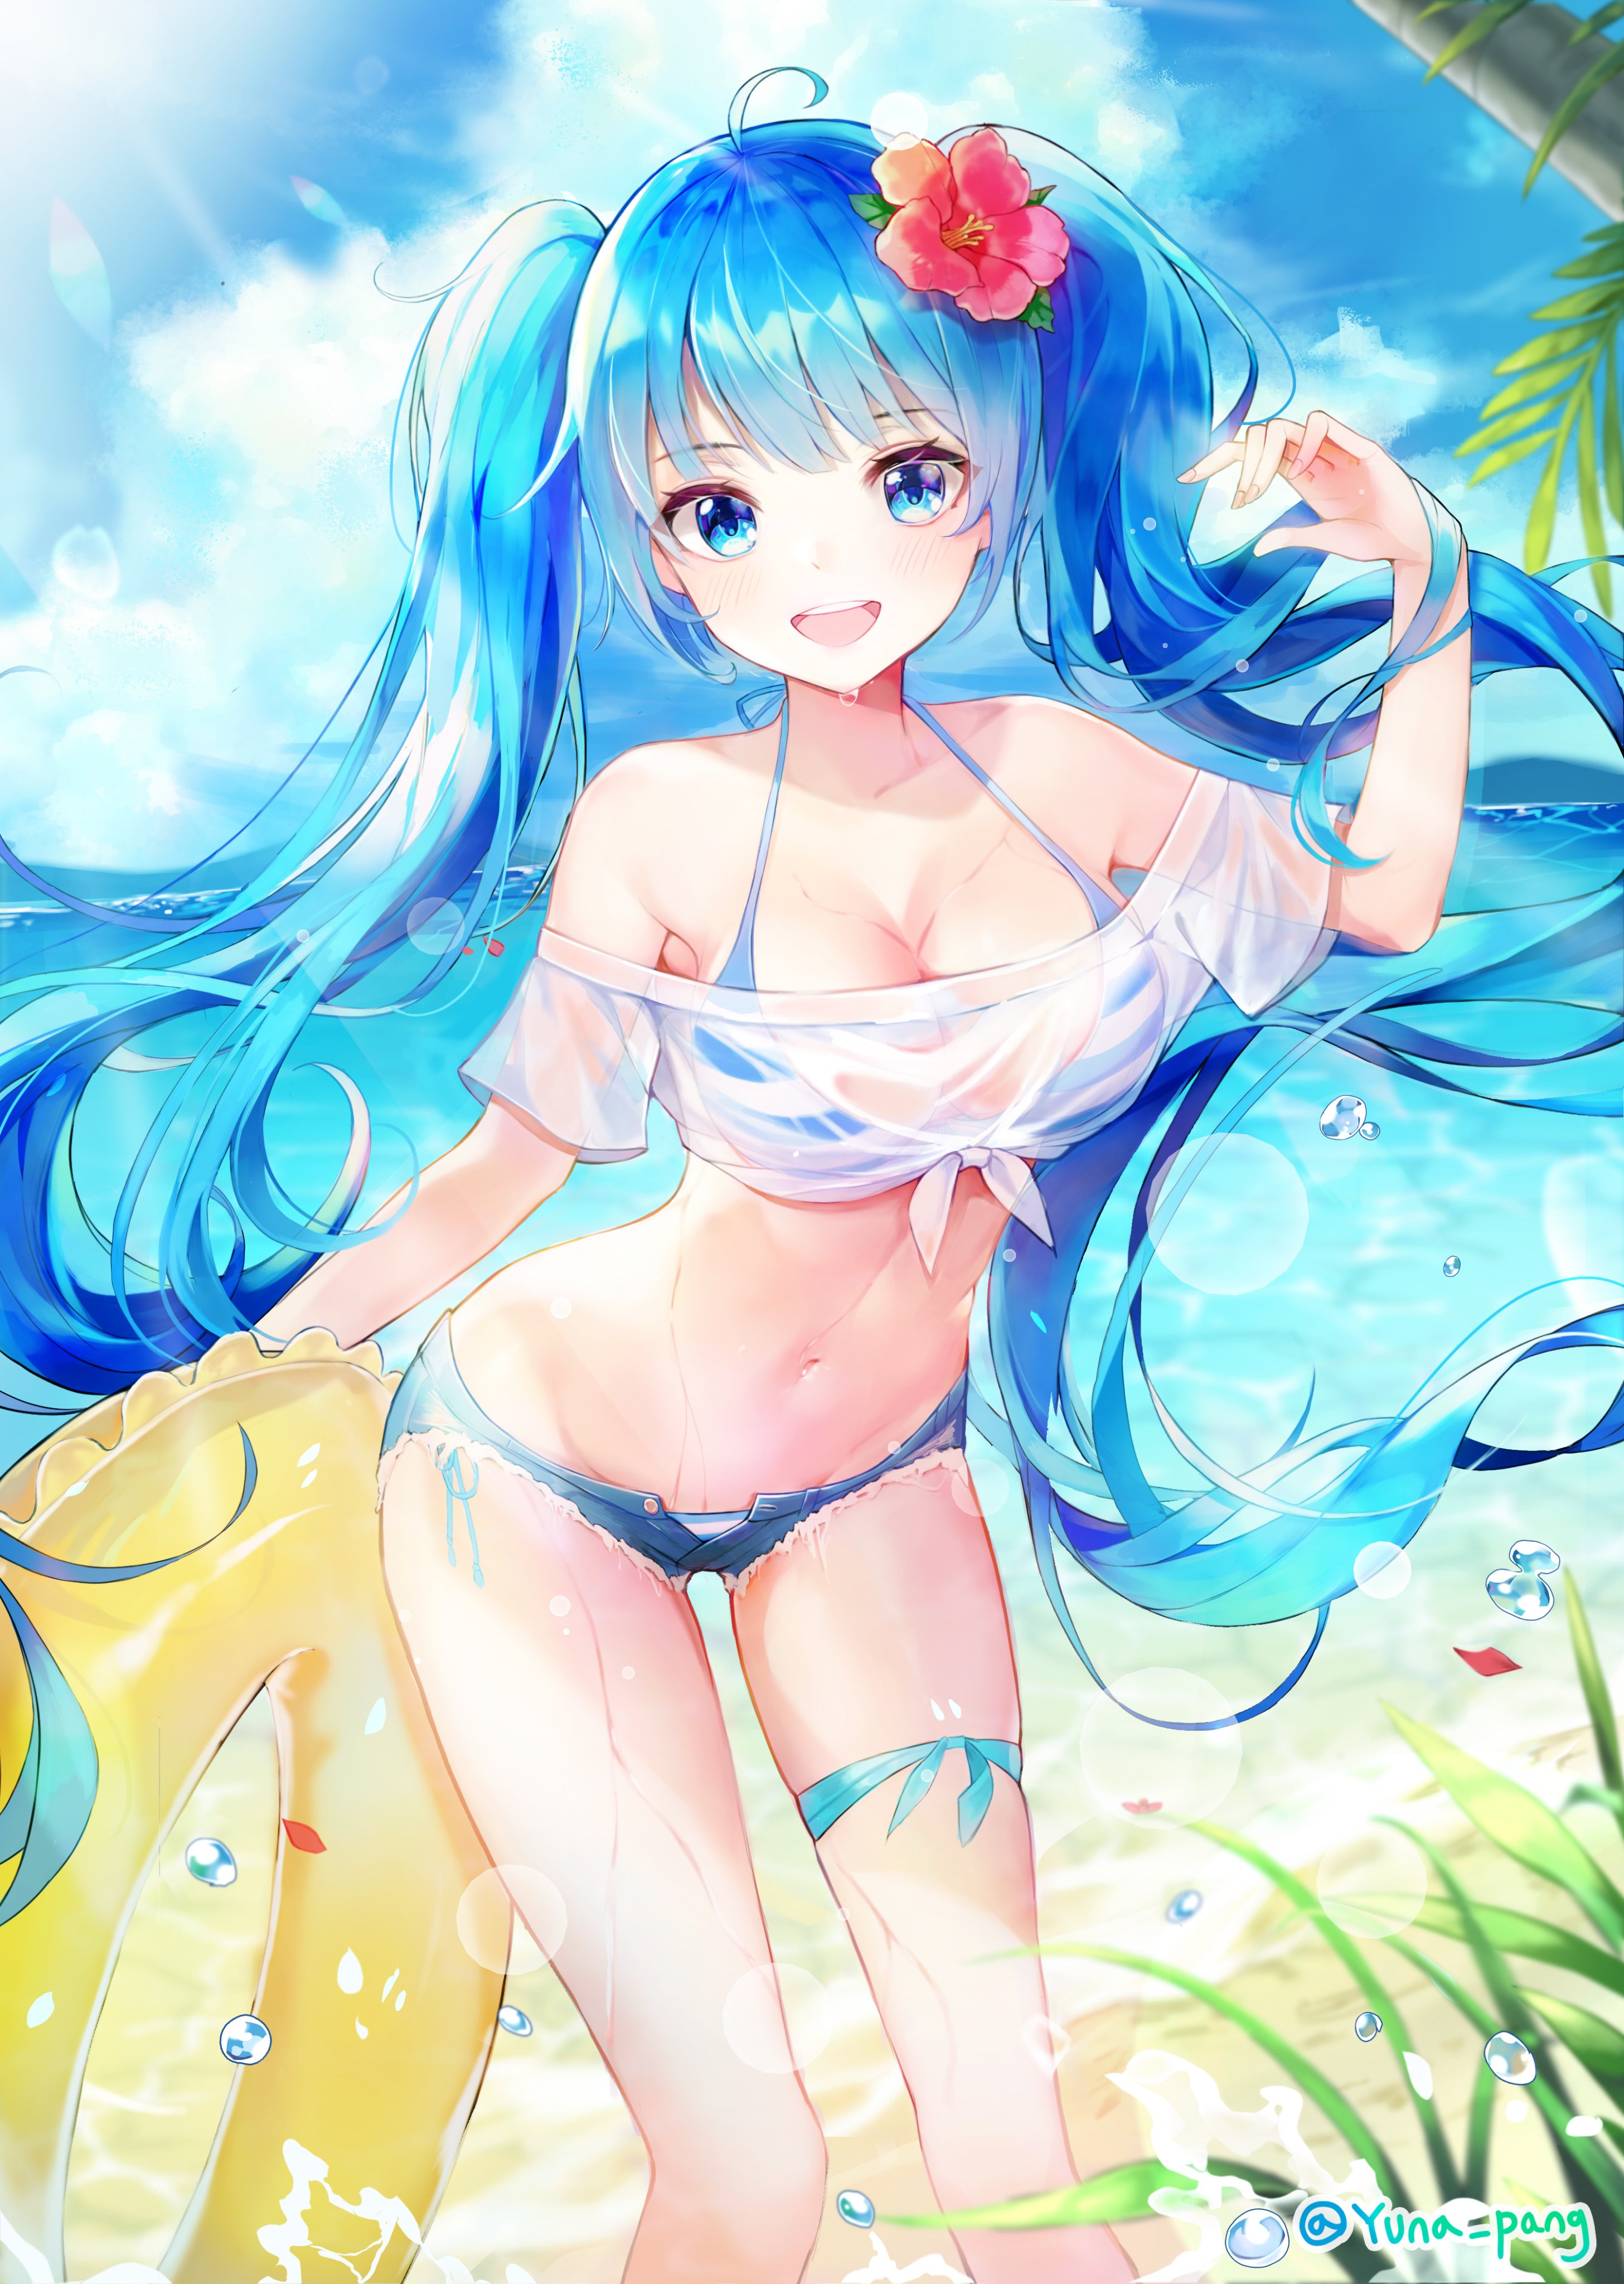 Anime 2913x4096 Yuna Pang Vocaloid anime girls portrait display Hatsune Miku bikini short shorts cleavage long hair blue hair blue eyes smiling open mouth floater jean shorts sunlight flowers looking at viewer flower in hair hibiscus water palm trees water drops beach leaves petals wet wet body frontal view open shorts belly button belly striped bikini sky see-through clothing clouds grass ahoge